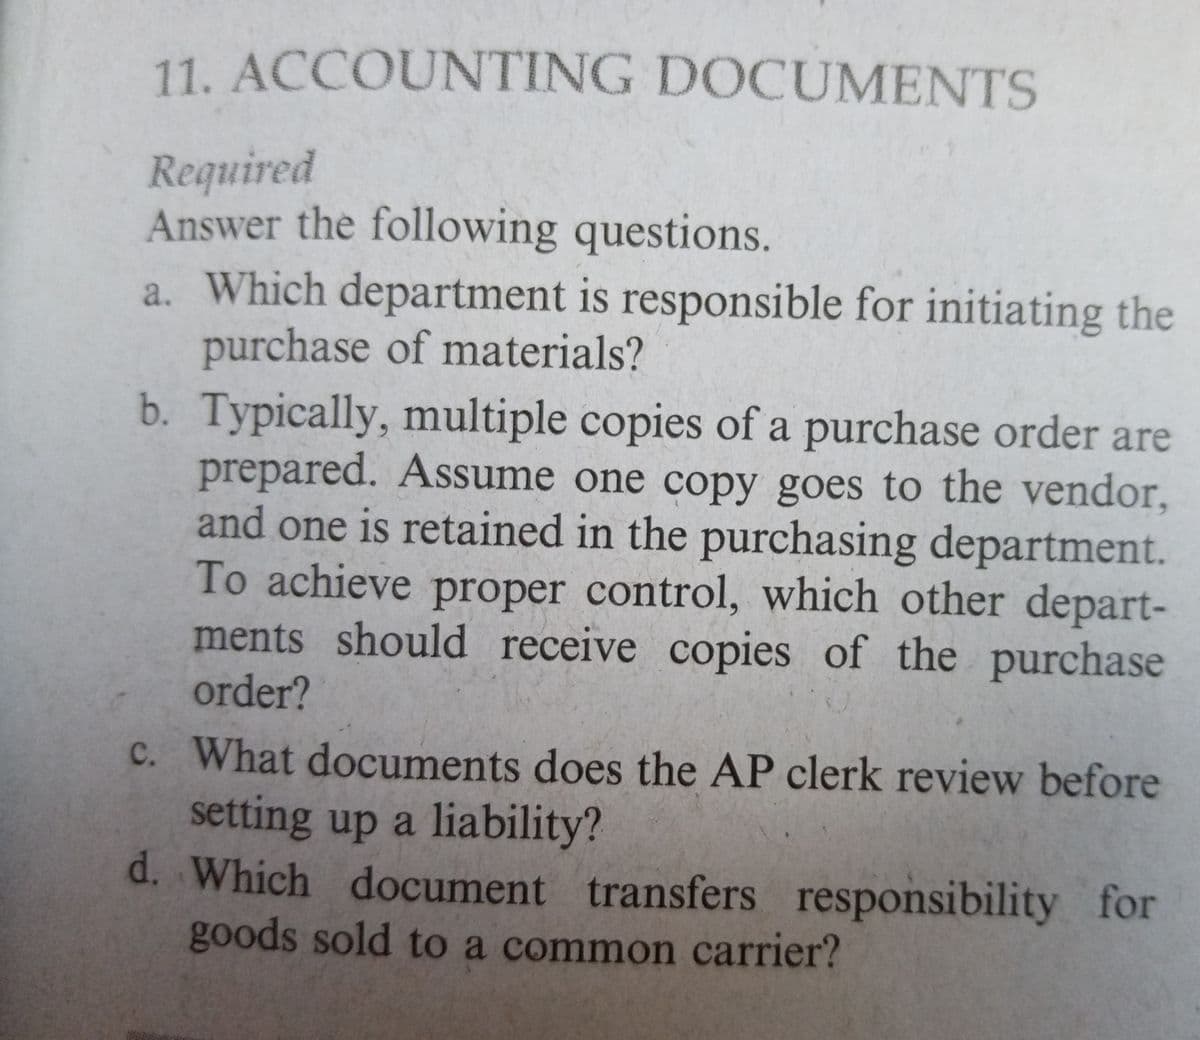 11. ACCOUNTING DOCUMENTS
Required
Answer the following questions.
a. Which department is responsible for initiating the
purchase of materials?
b. Typically, multiple copies of a purchase order are
prepared. Assume one copy goes to the vendor,
and one is retained in the purchasing department.
To achieve proper control, which other depart-
ments should receive copies of the purchase
order?
c. What documents does the AP clerk review before
setting up a liability?
d. Which document transfers responsibility for
goods sold to a common carrier?
